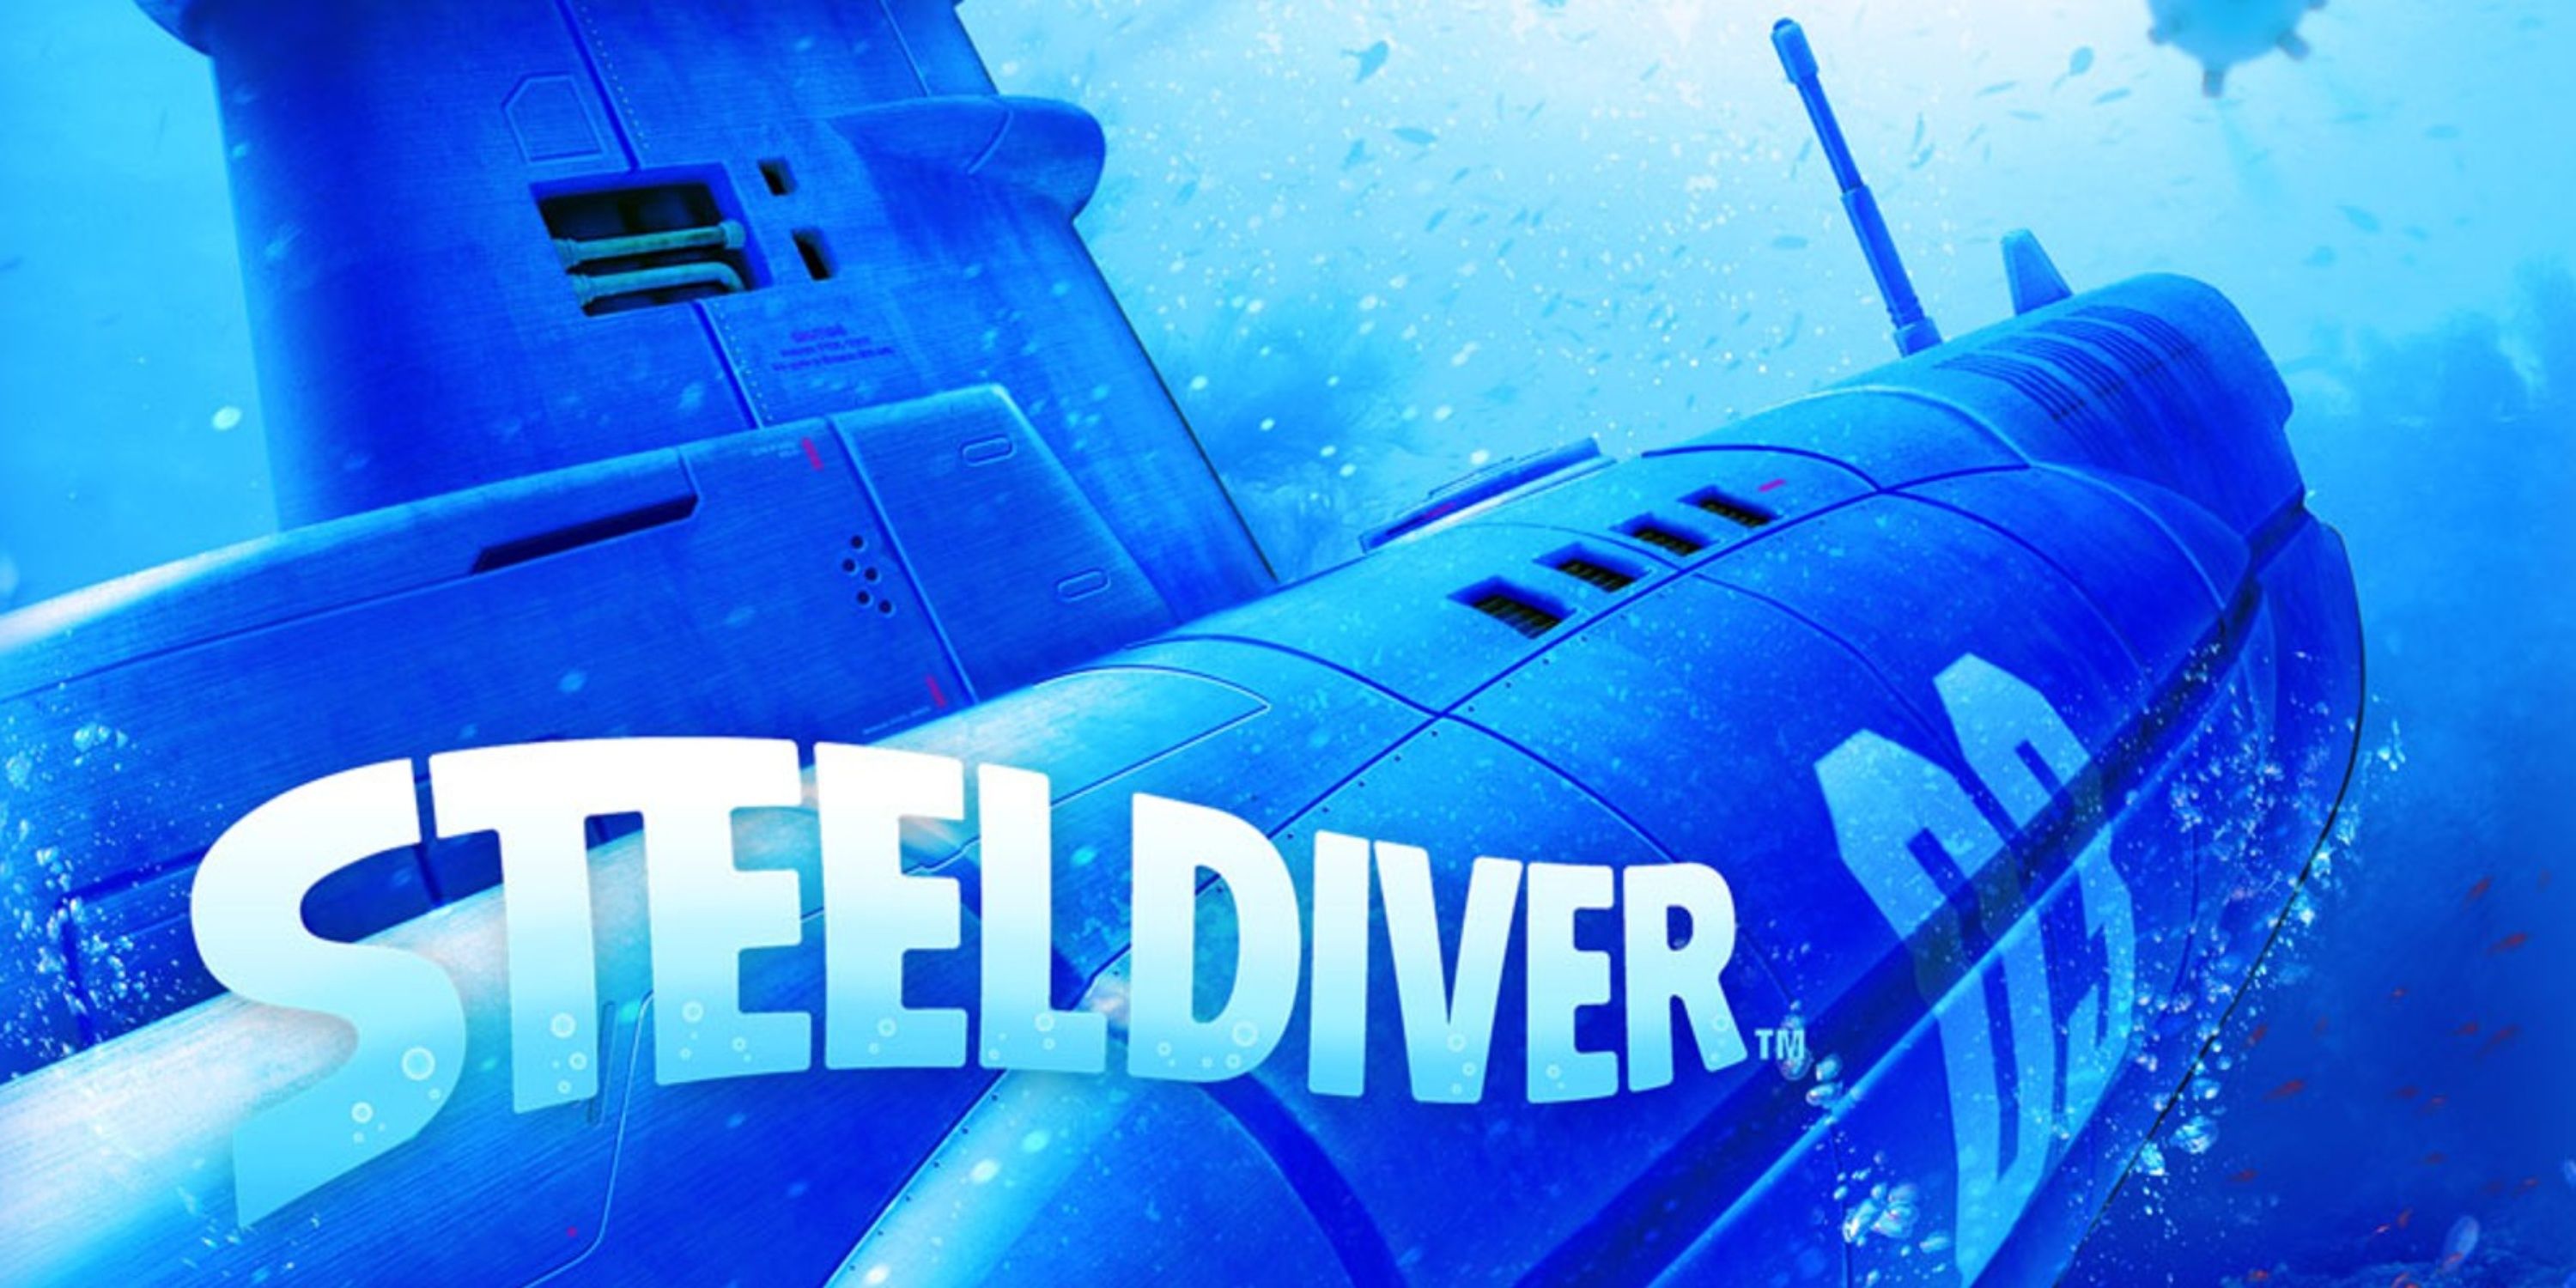 Steel Diver 3DS cover promo image